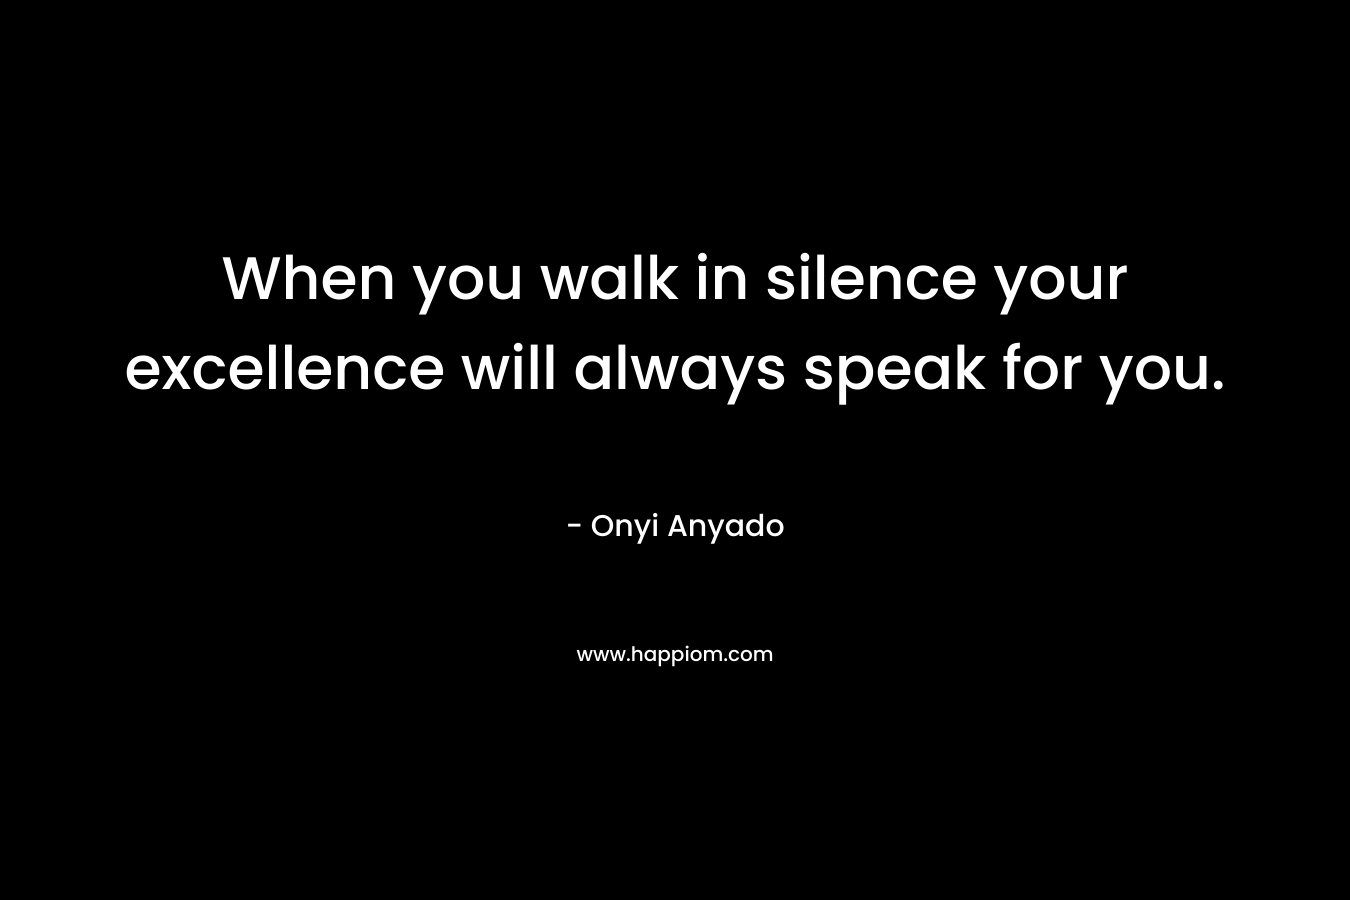 When you walk in silence your excellence will always speak for you.